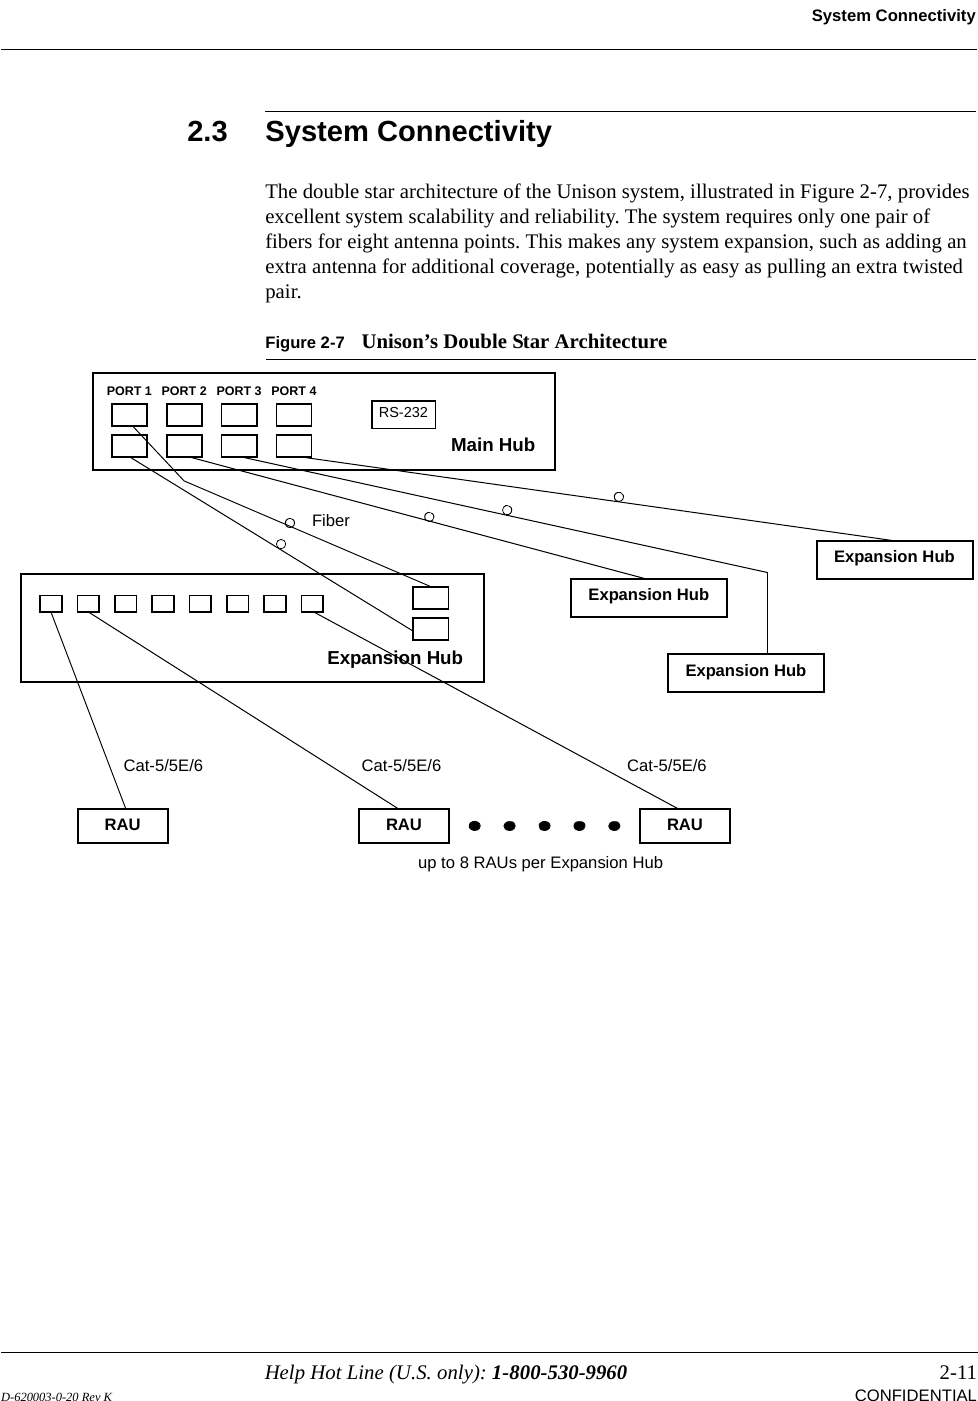 Help Hot Line (U.S. only): 1-800-530-9960 2-11D-620003-0-20 Rev K CONFIDENTIALSystem Connectivity2.3 System ConnectivityThe double star architecture of the Unison system, illustrated in Figure 2-7, provides excellent system scalability and reliability. The system requires only one pair of fibers for eight antenna points. This makes any system expansion, such as adding an extra antenna for additional coverage, potentially as easy as pulling an extra twisted pair.Figure 2-7 Unison’s Double Star ArchitectureMain HubRS-232PORT 1 PORT 2 PORT 3 PORT 4Expansion Hub Expansion HubFiberExpansion HubExpansion HubCat-5/5E/6Cat-5/5E/6 Cat-5/5E/6up to 8 RAUs per Expansion HubRAU RAU RAU